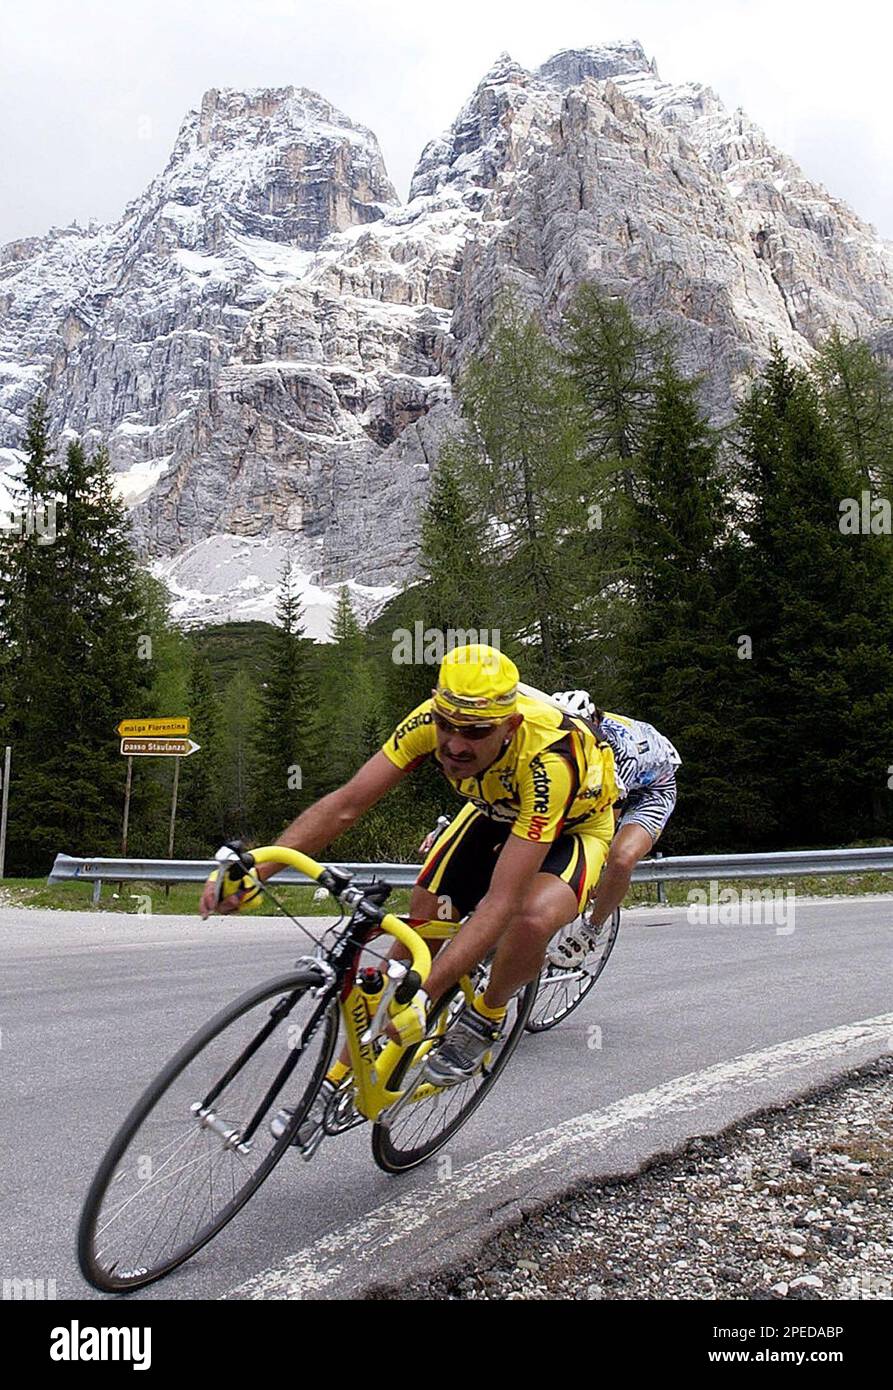 ** FILE **Italian cyclist Marco Pantani pedals through the Dolomite mountains during the 16th stage of the Tour of Italy cycling race, from Conegliano Veneto to Corvara in Badia, near Bolzano, Italy, in this file photo taken on May 29, 2002. A former Tour de France and Giro d'Italia winner, Marco Pantani was found dead in a residence in Rimini, northern Italy, one year ago, on Feb. 14, 2004. (AP Photo/Alessandro Trovati) Stock Photo